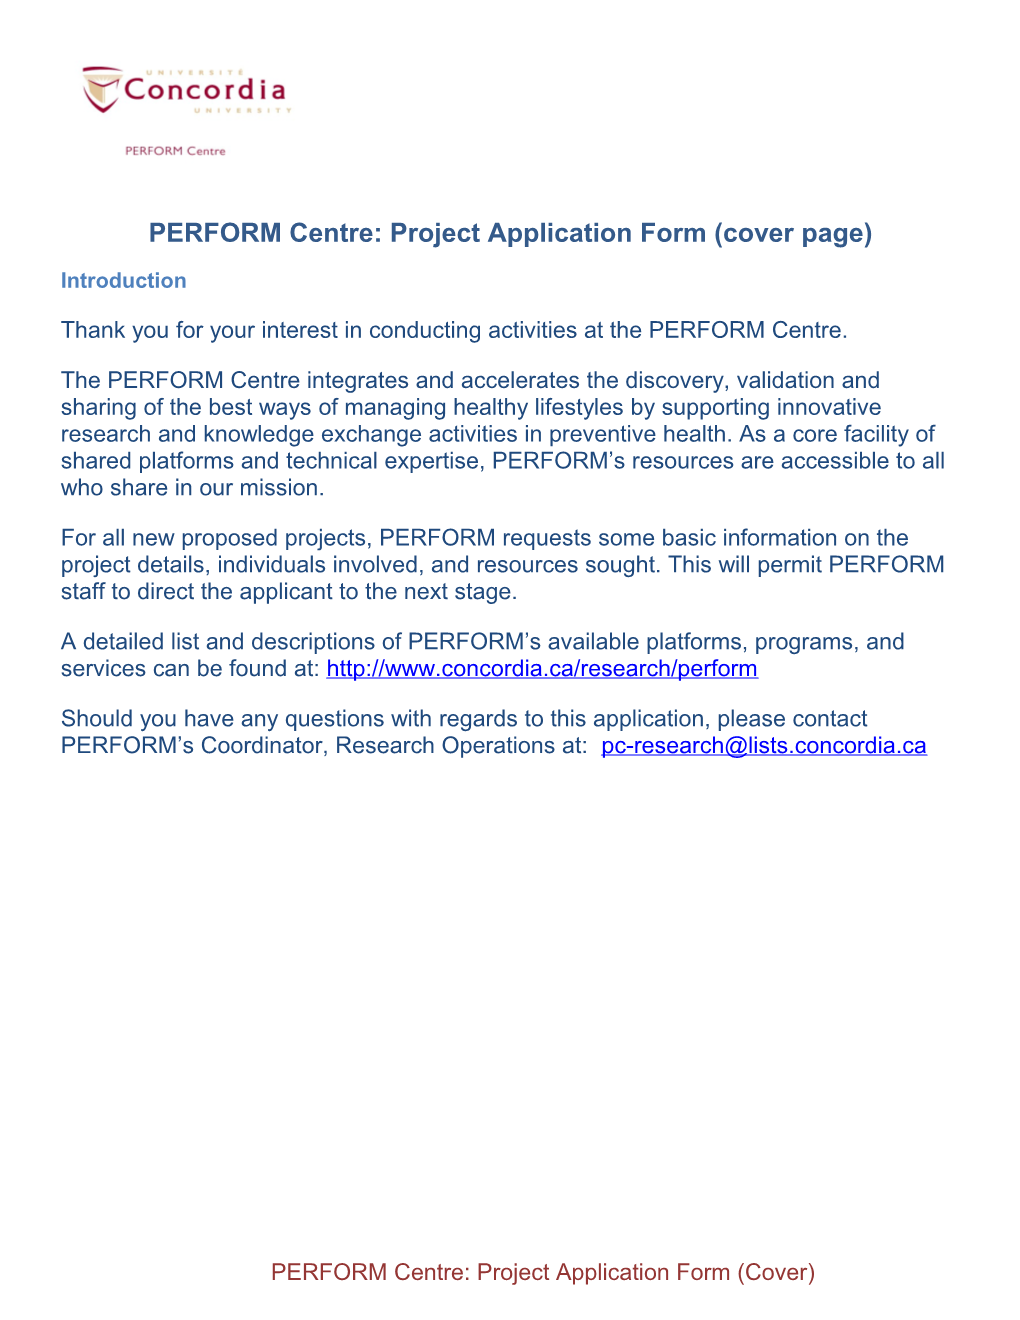 PERFORM Centre: Project Application Form (Cover Page)